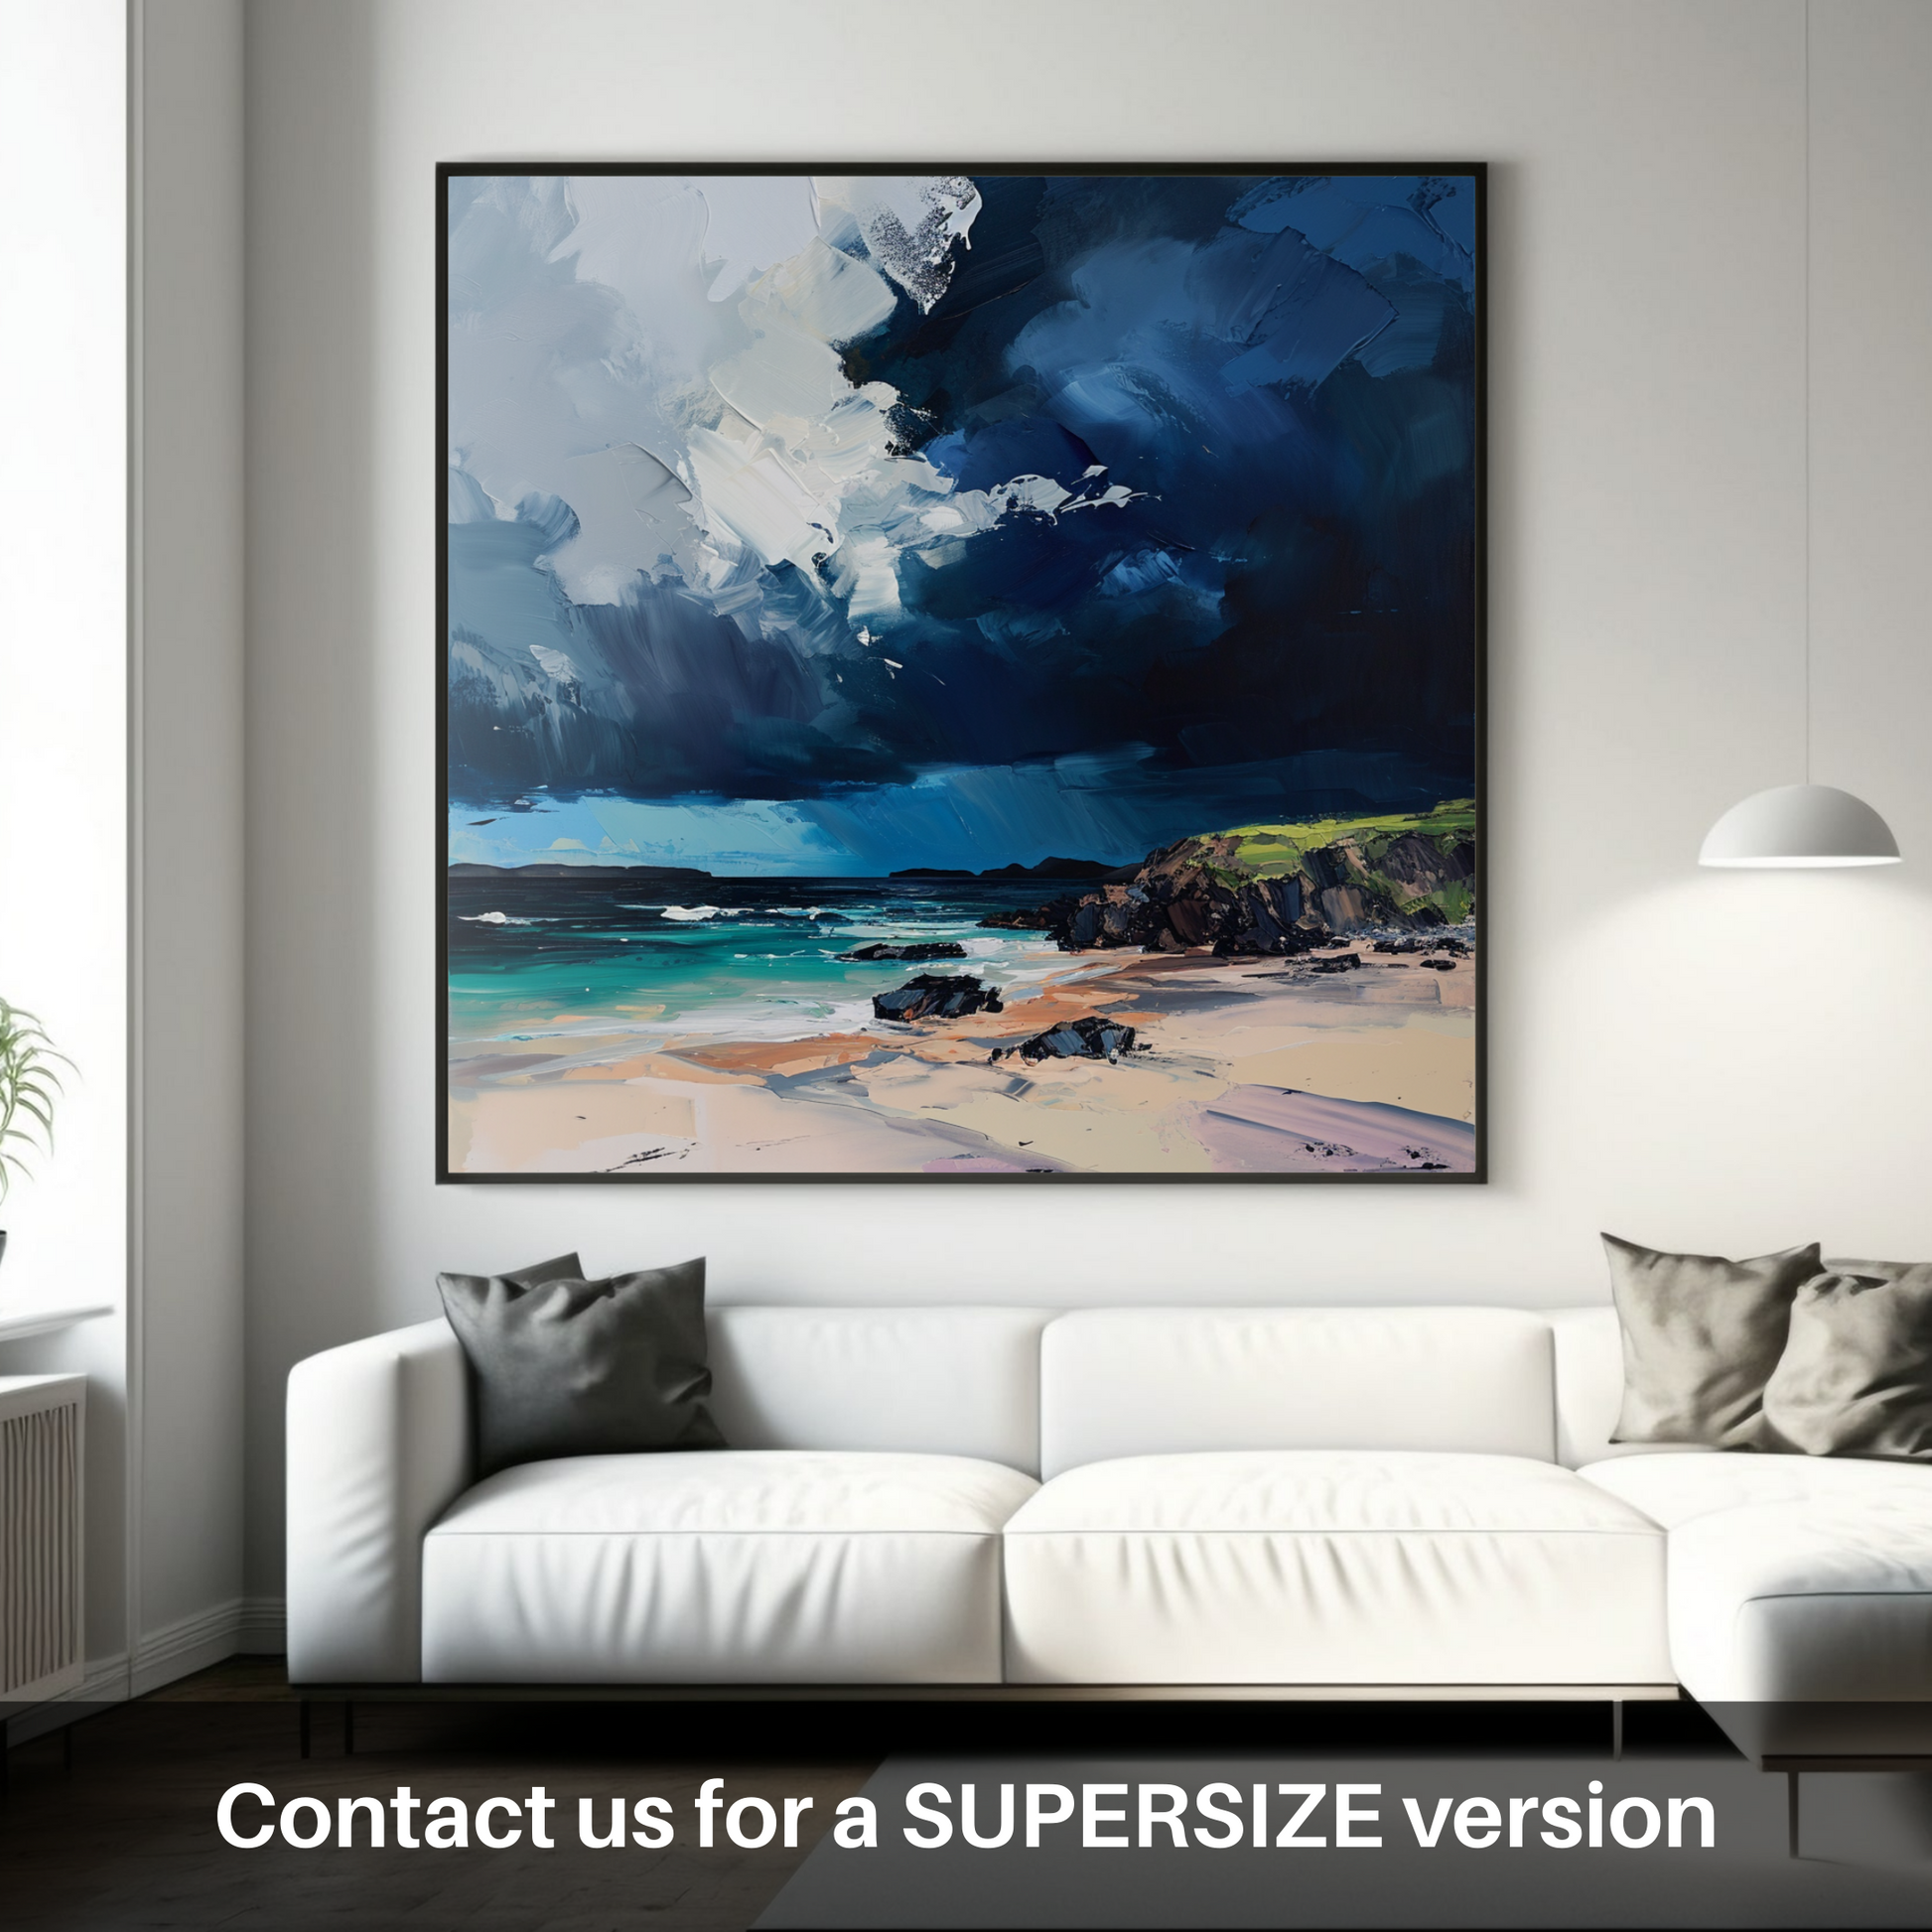 Huge supersize print of Balnakeil Bay with a stormy sky